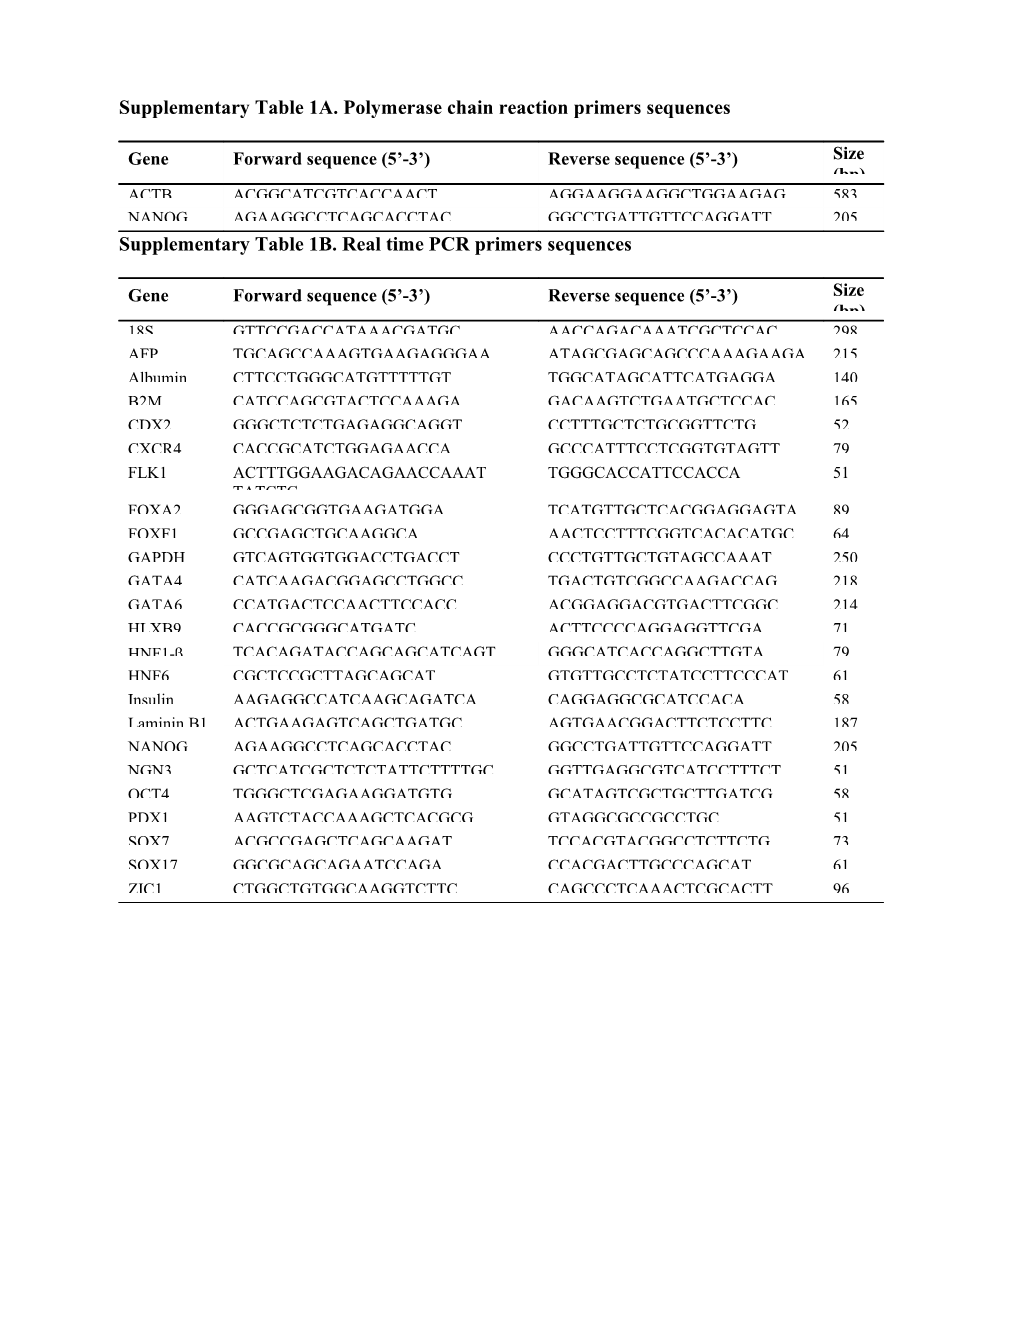 Supplementary Table 1A. Polymerase Chain Reaction Primers Sequences